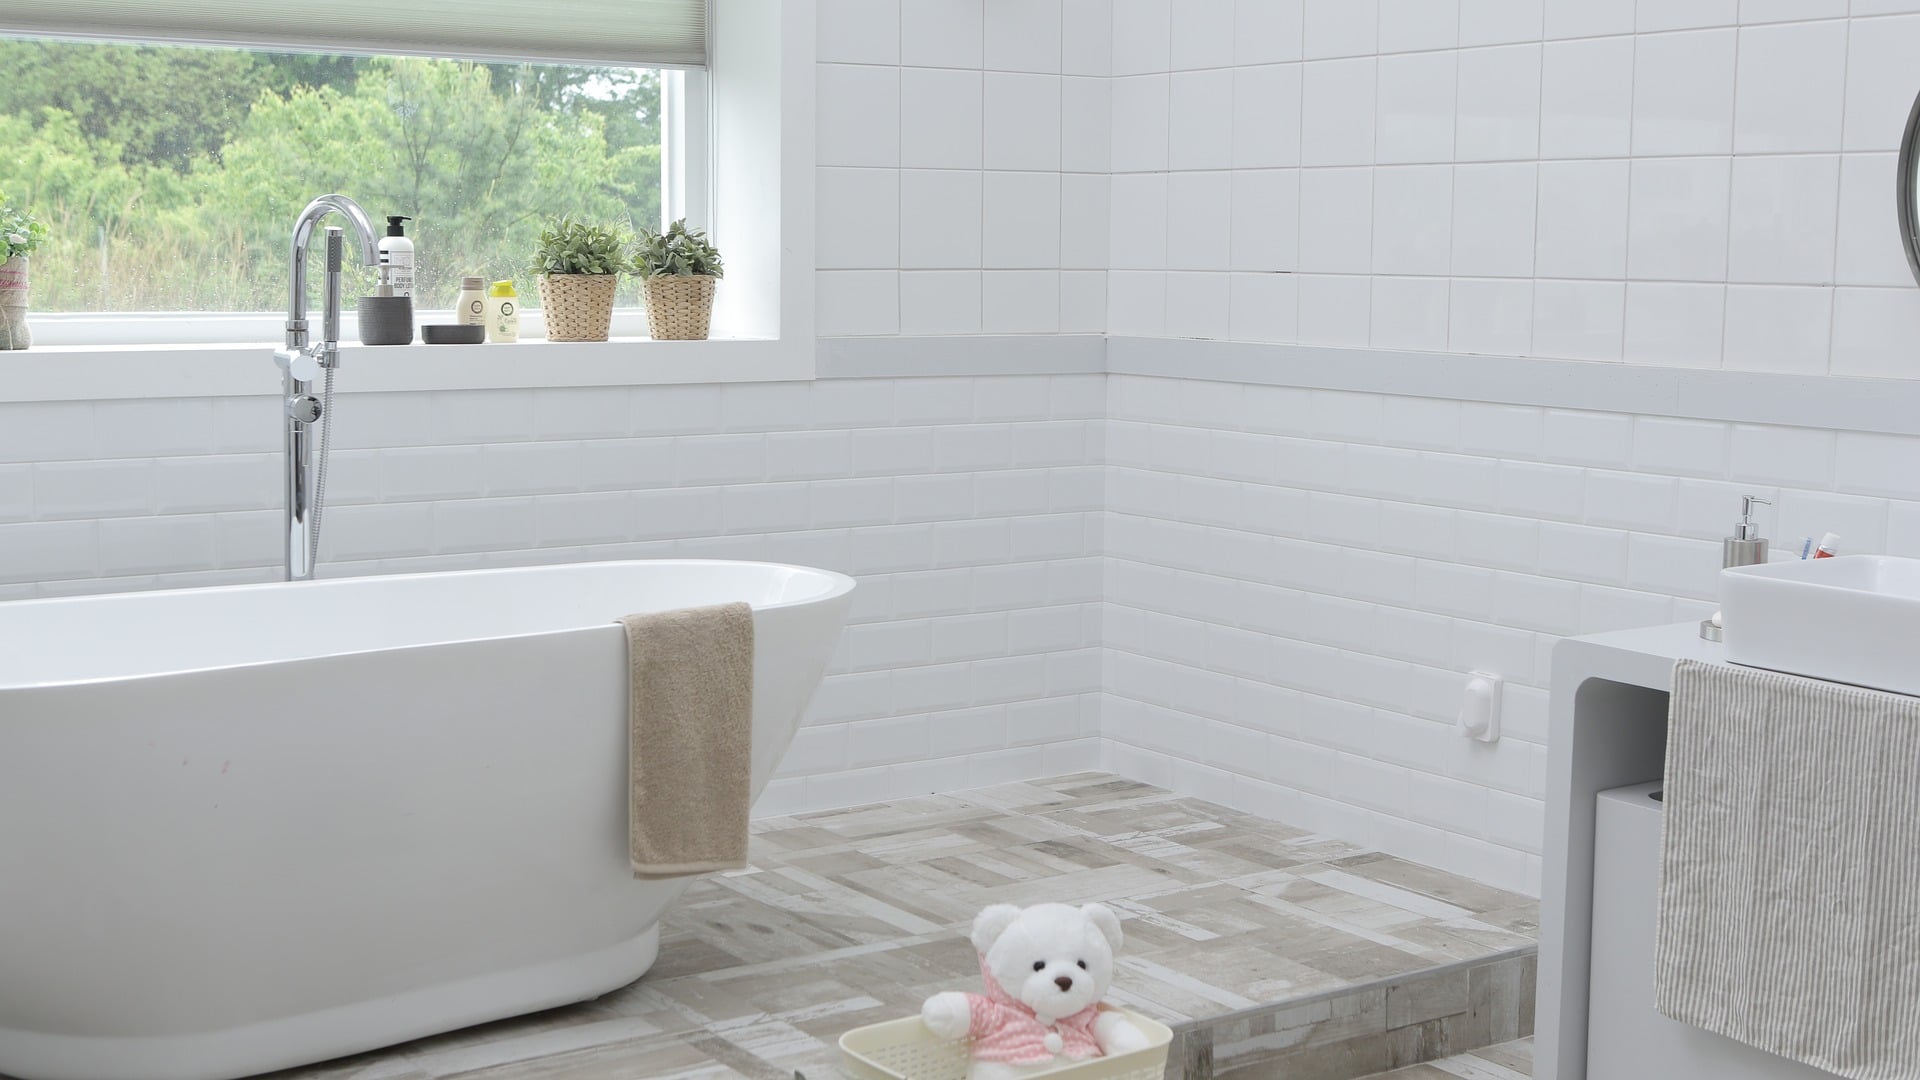 6 Affordable Ways To Update Your Bathroom